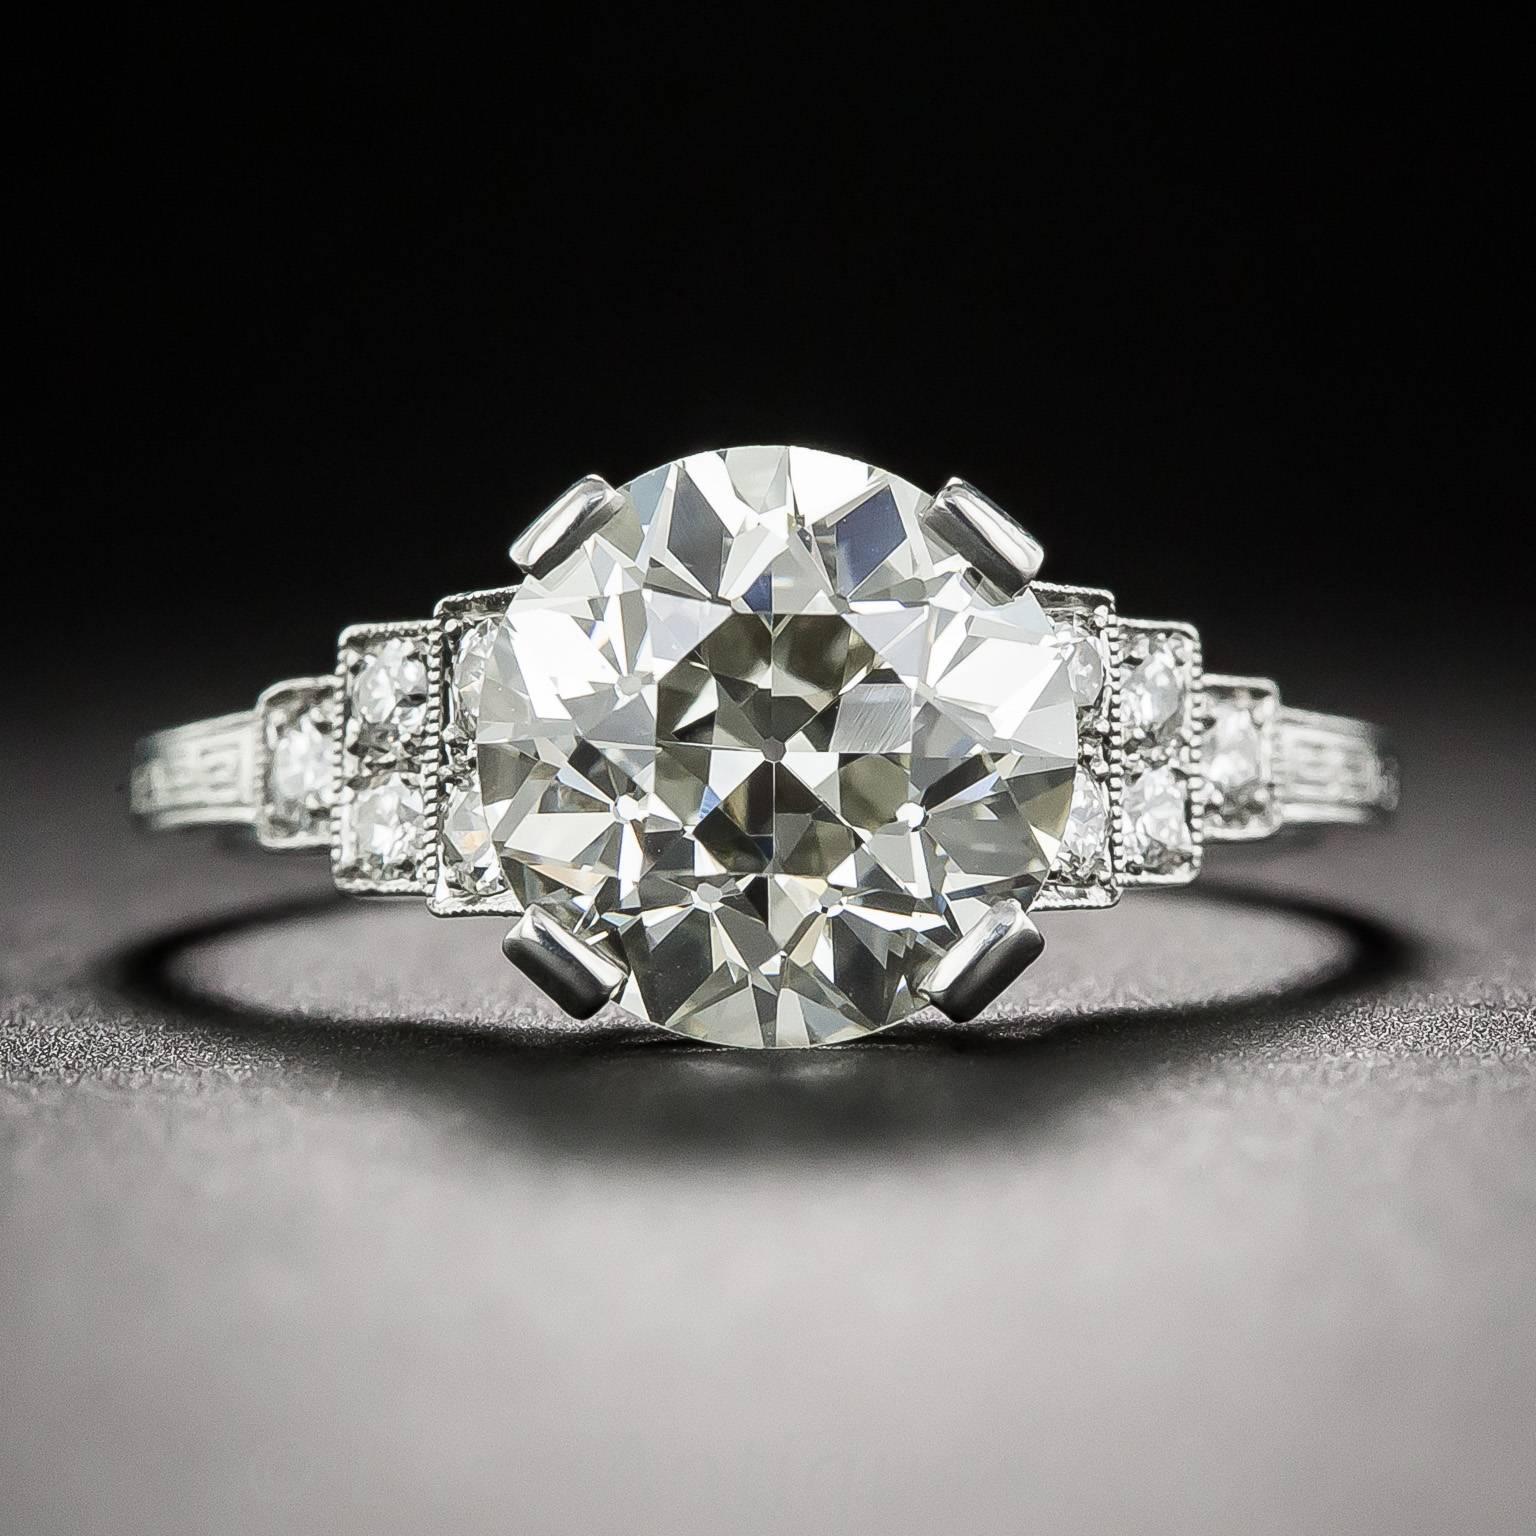 Sparkling diamond-set platinum steps, edged in fine milgrain, lead to a splendid 2.58 carat European-cut diamond, which comes with a GIA Report stating: L color, VS1 clarity. 

The dazzling center diamond is set within four broad prongs, which